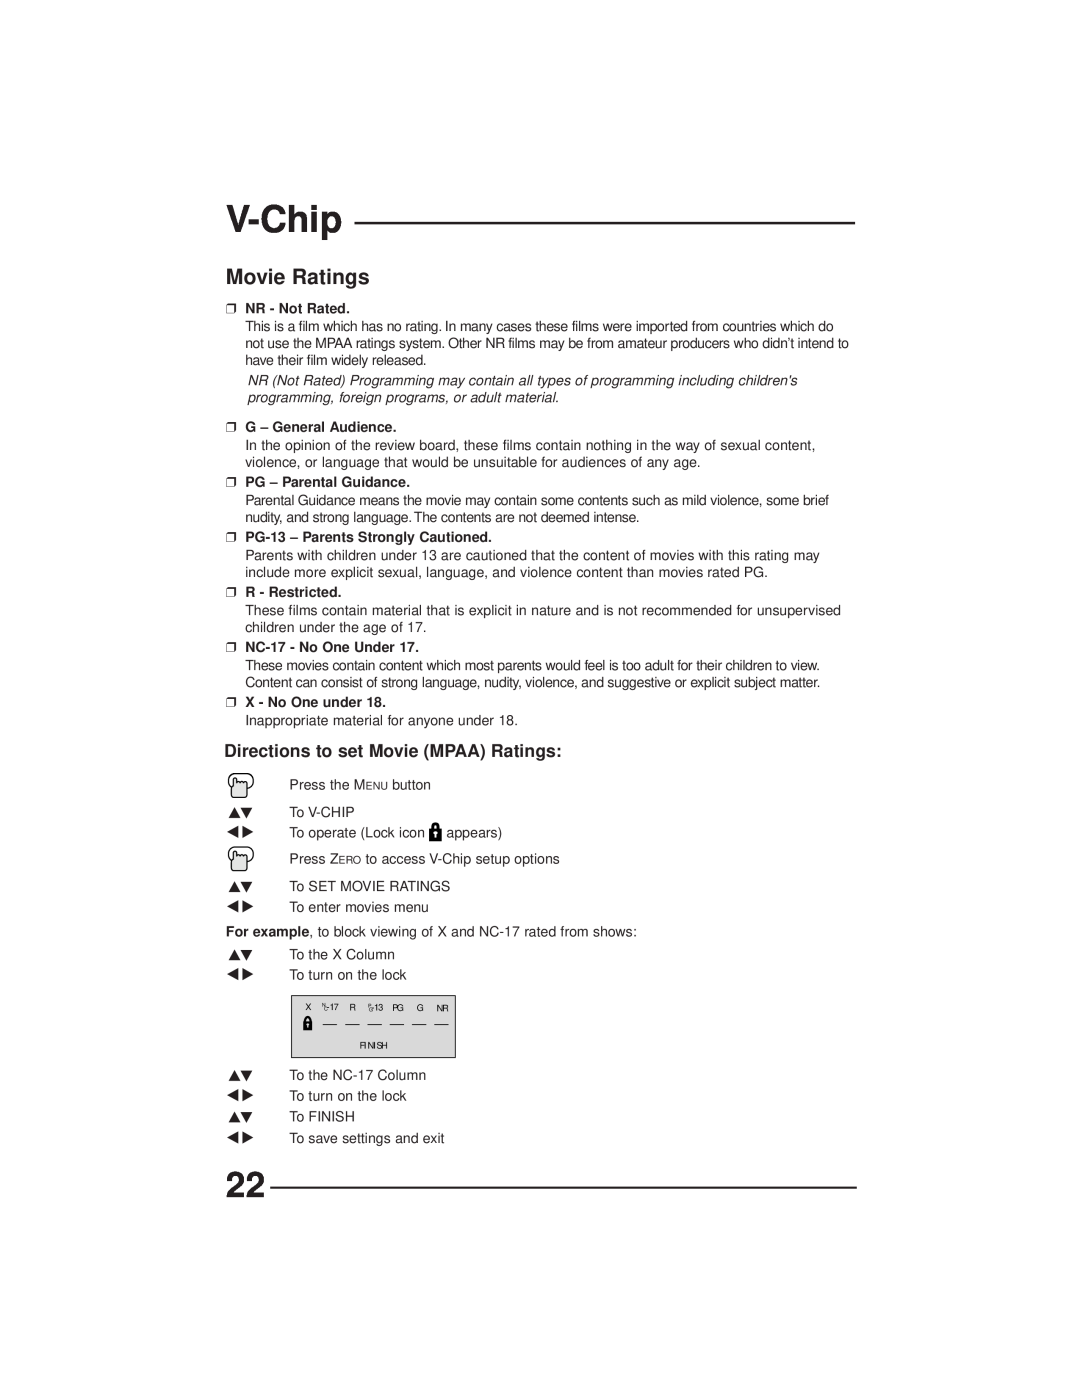 JVC AV-27GFH manual Movie Ratings, V-Chip, Directions to set Movie MPAA Ratings, NR - Not Rated, G - General Audience 